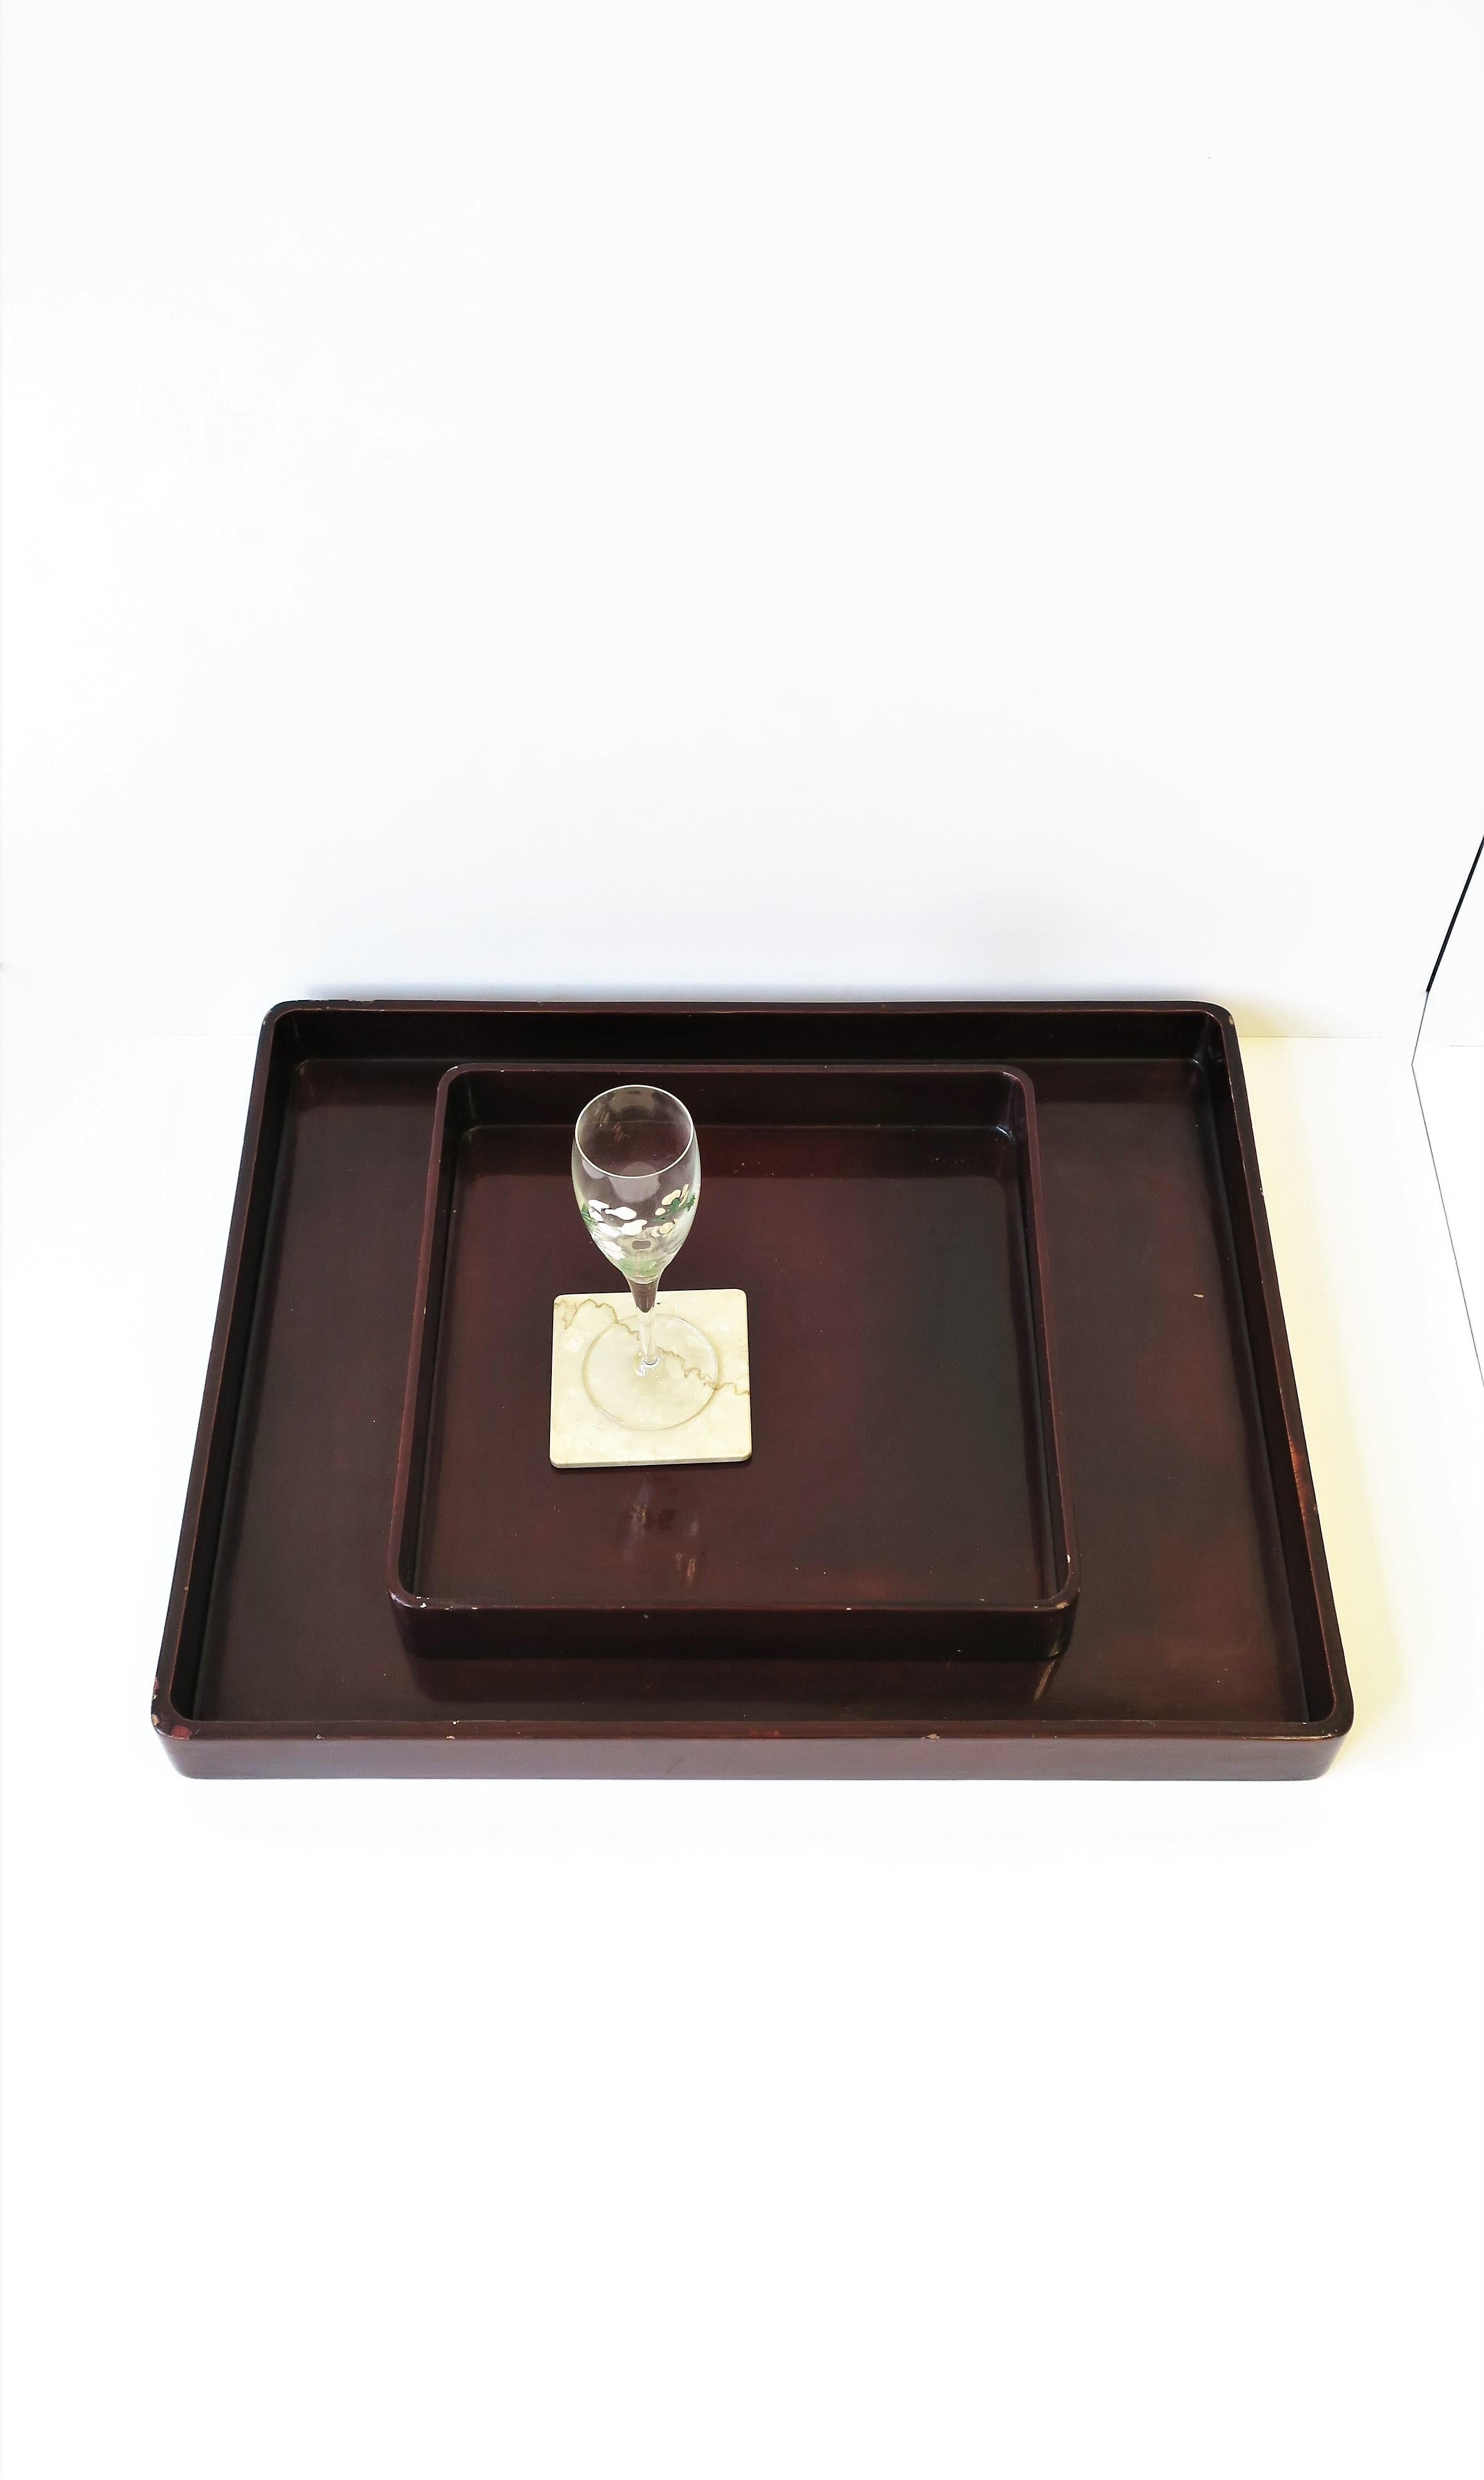 Red Burgundy Lacquer Serving Tray by Designer Rae Kasian, Square 6